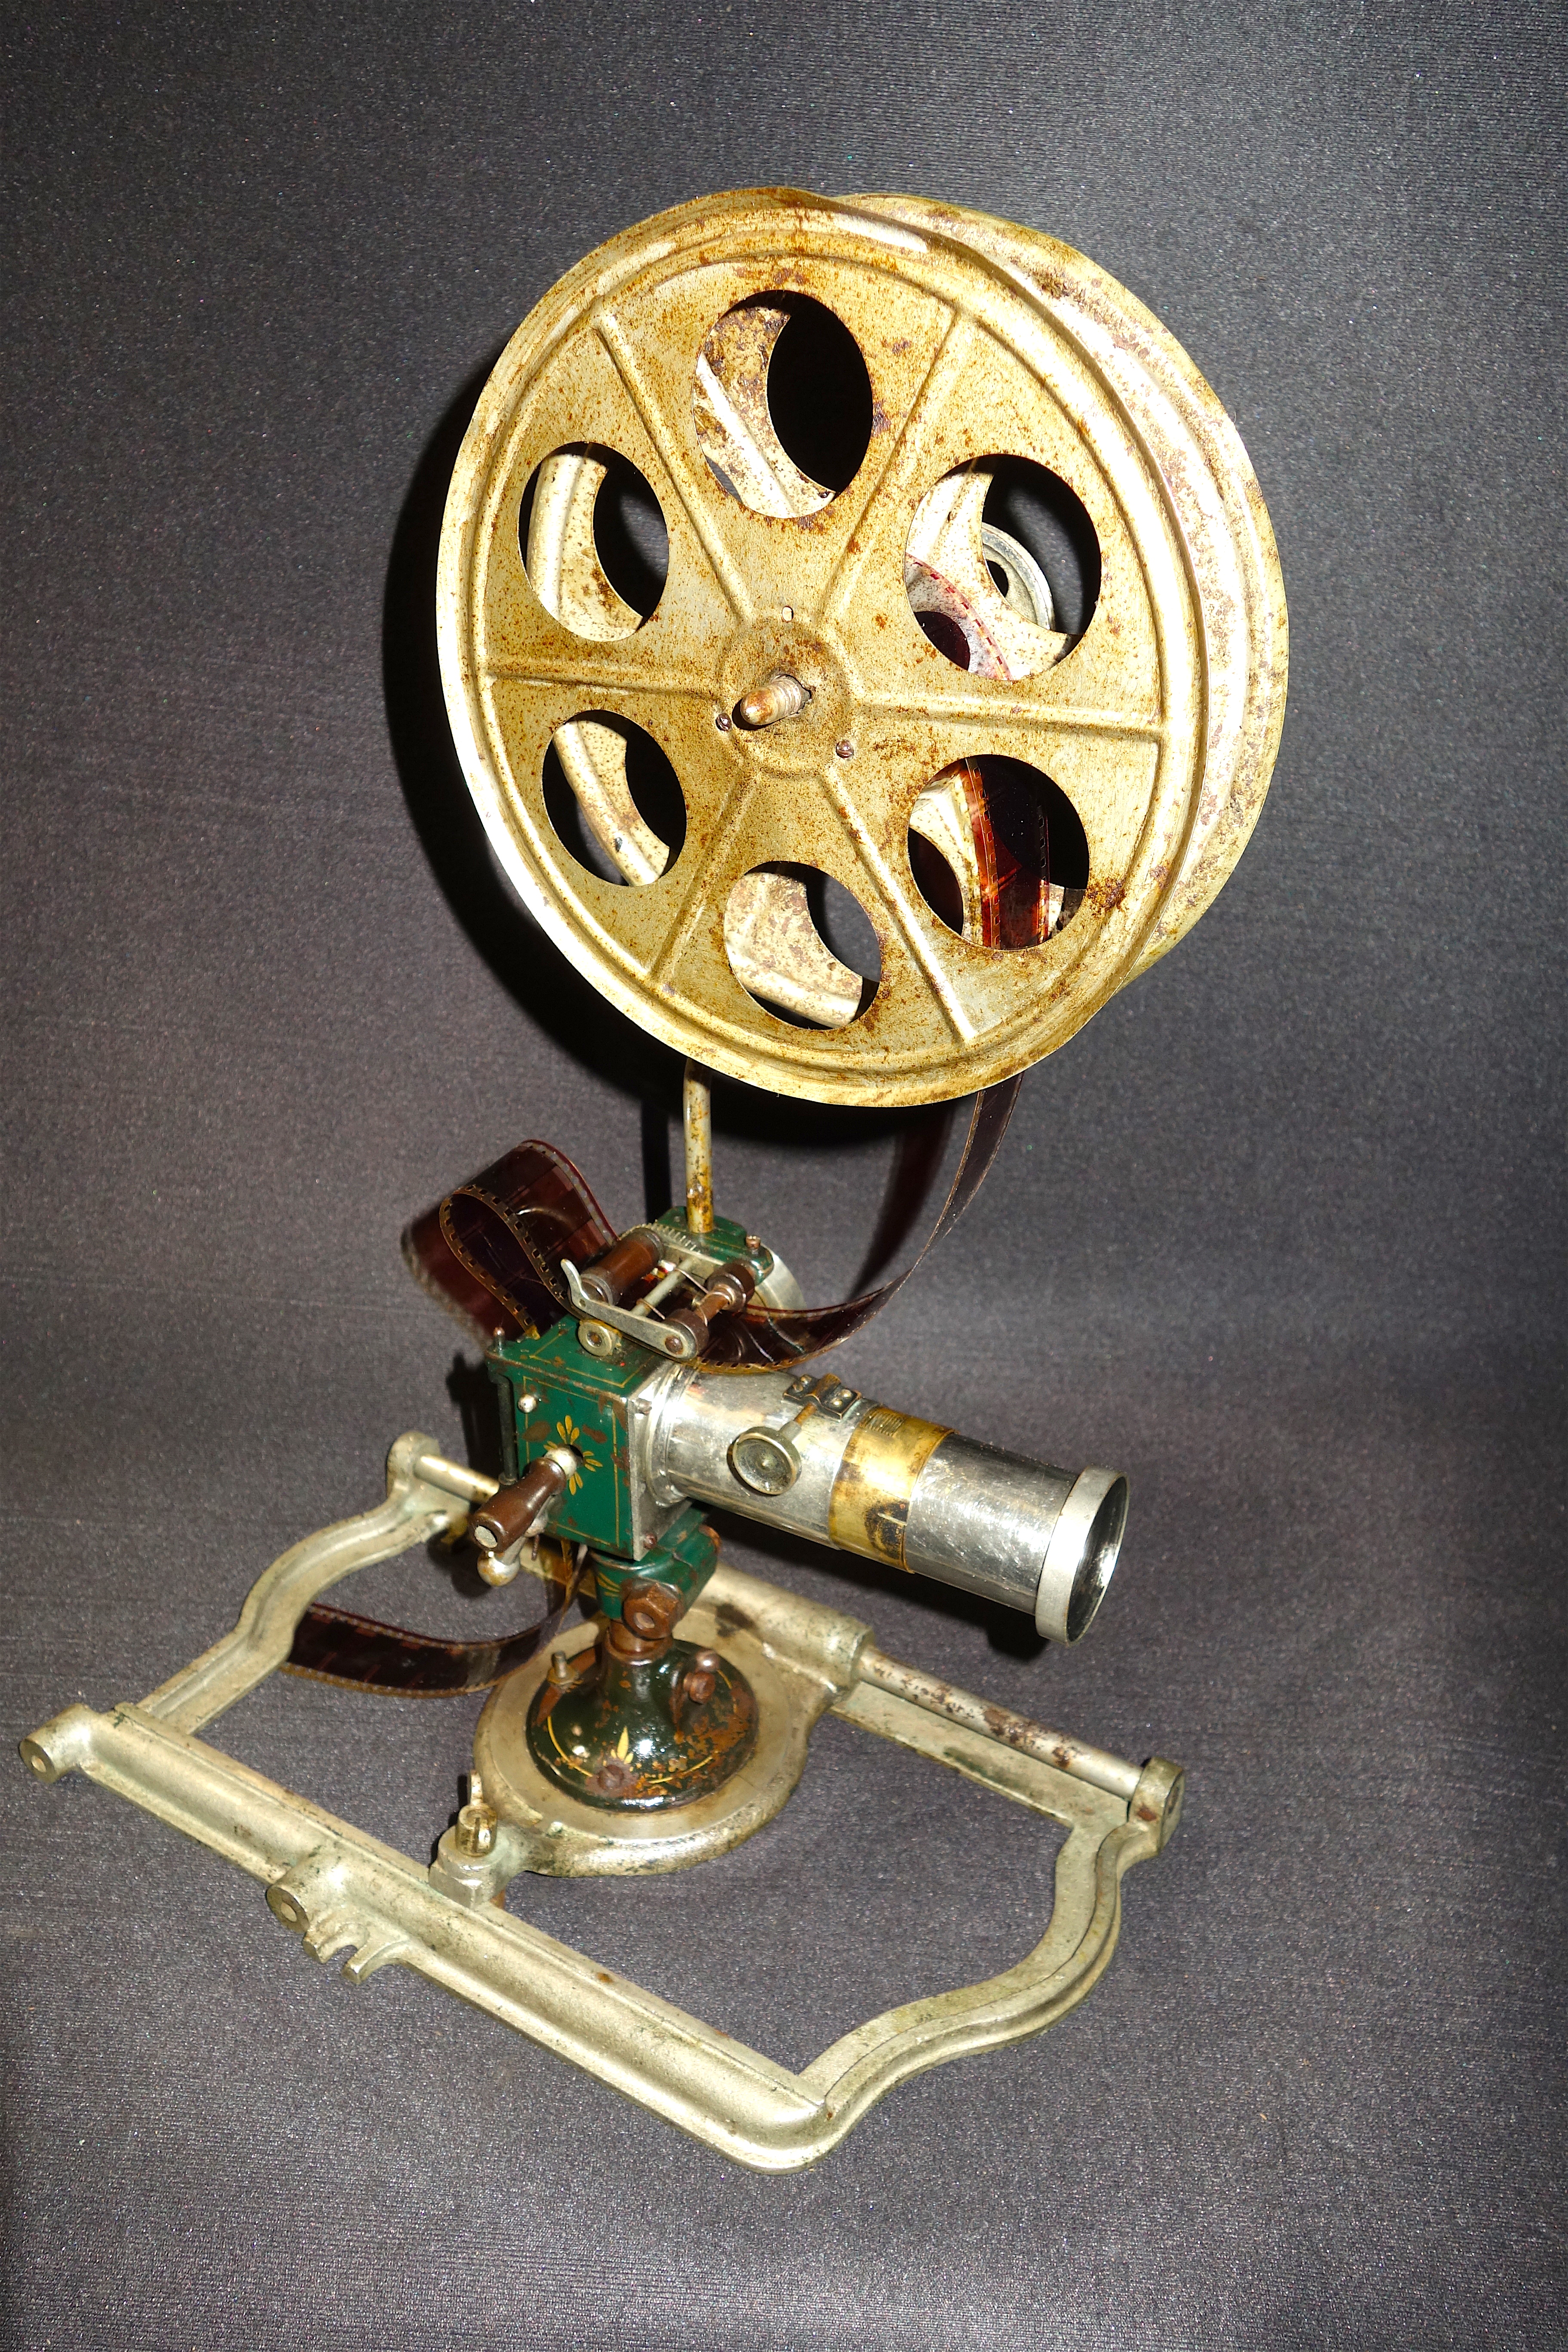 35mm Antique Hand Crank Movie Projector, Patented 1899, Built